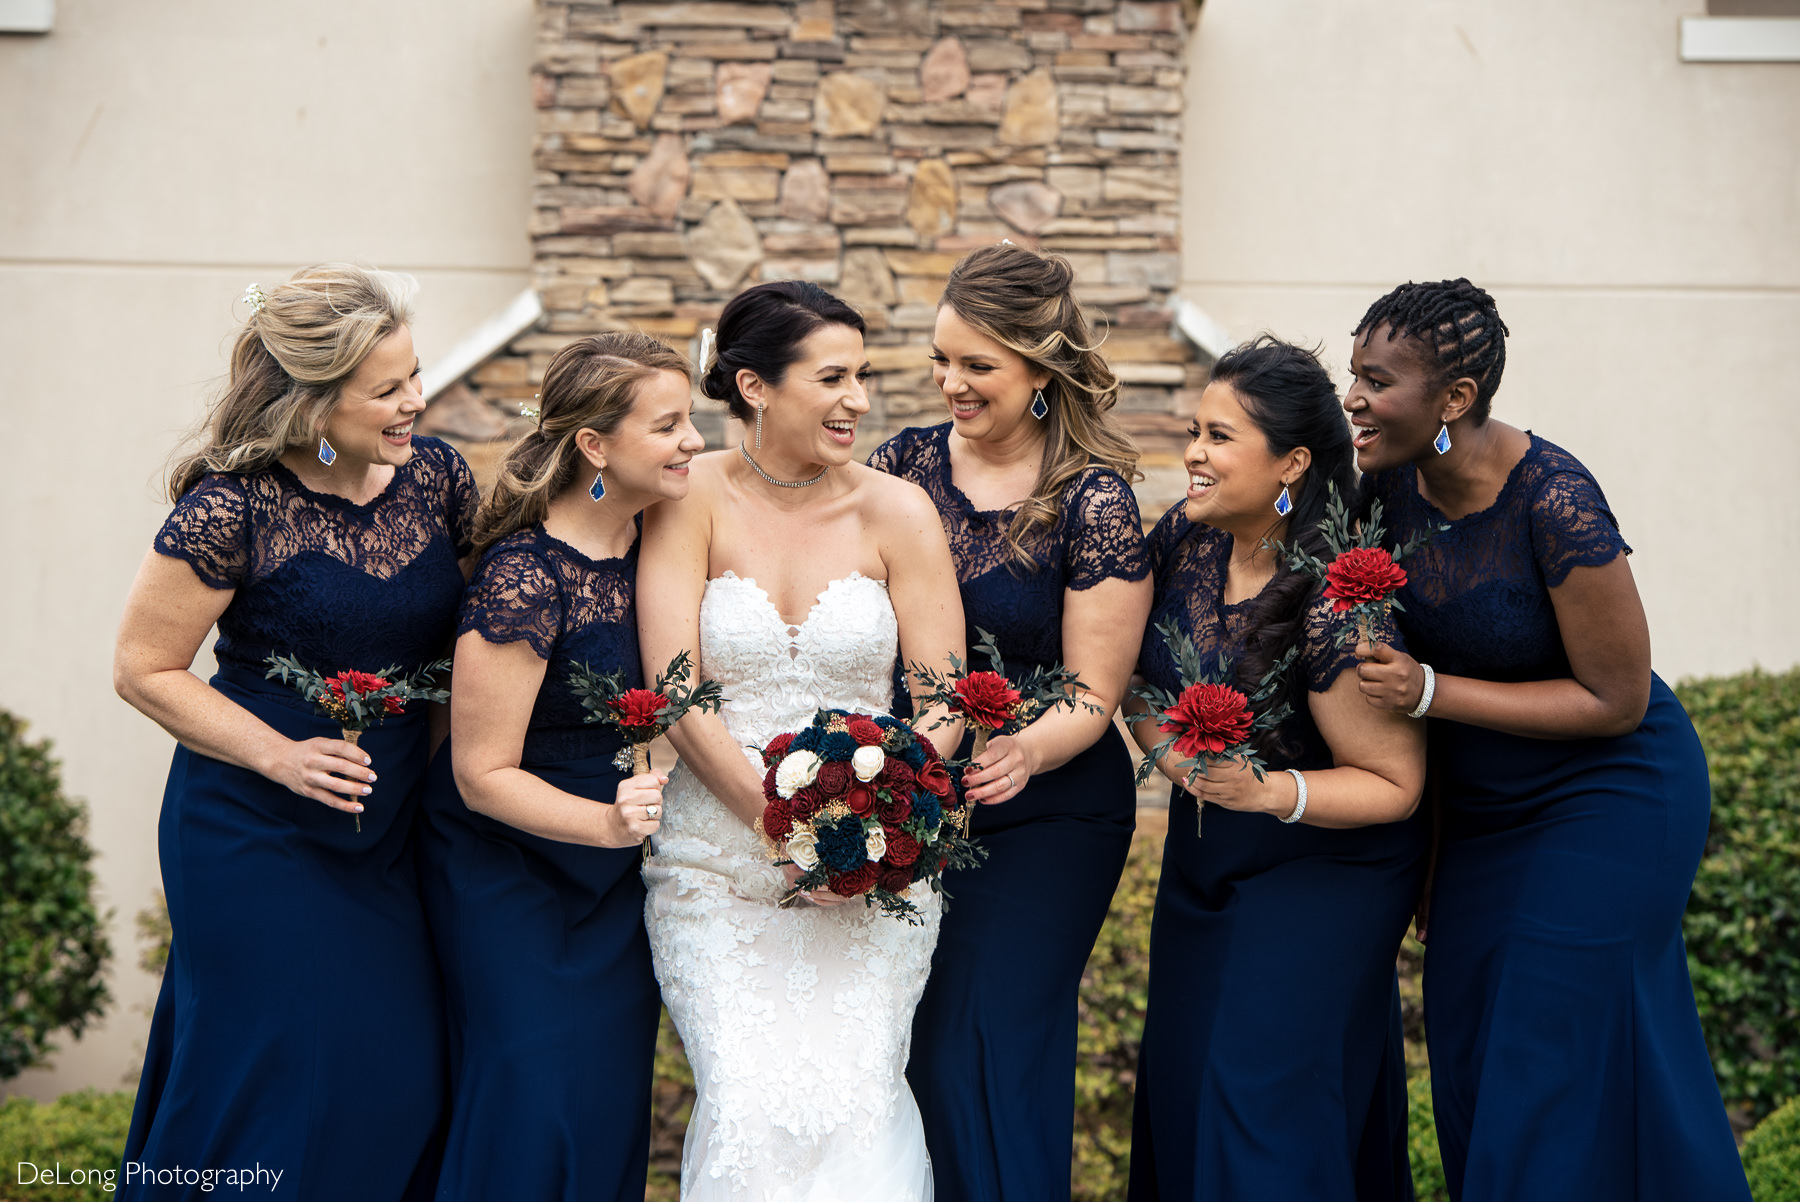 Bride with bridesmaids wearing navy dresses with red, white, and blue bouquets at Childress Vineyards by Charlotte Wedding Photographers DeLong Photography